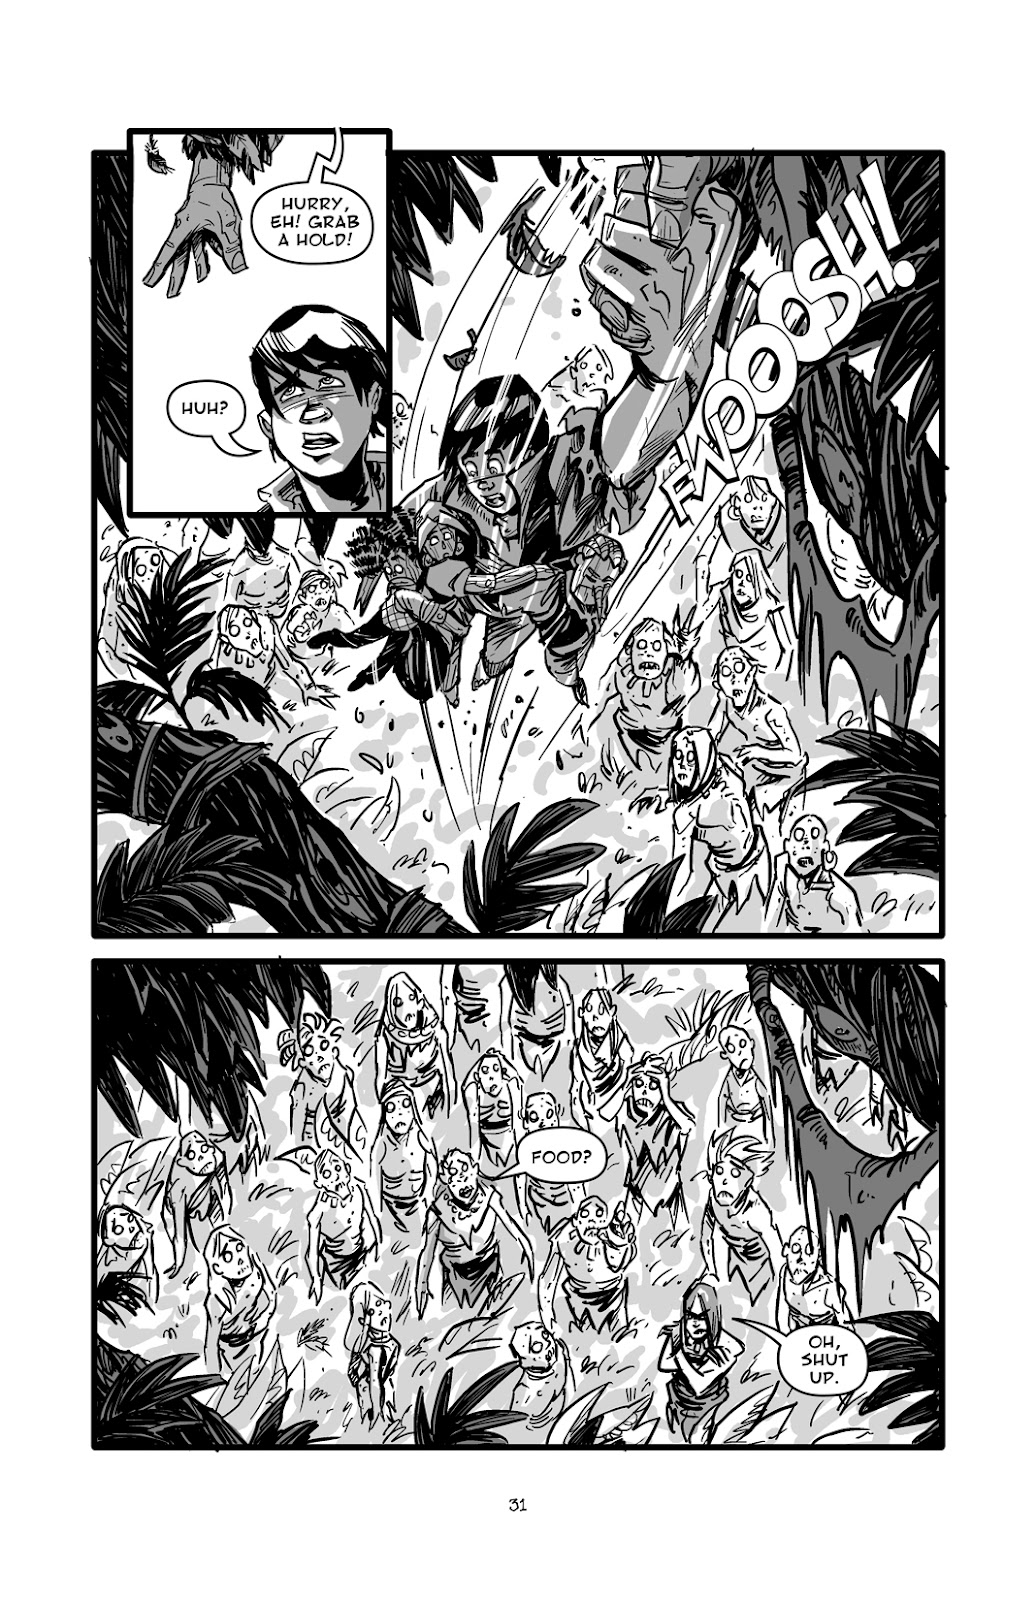 Pinocchio: Vampire Slayer - Of Wood and Blood issue 2 - Page 6